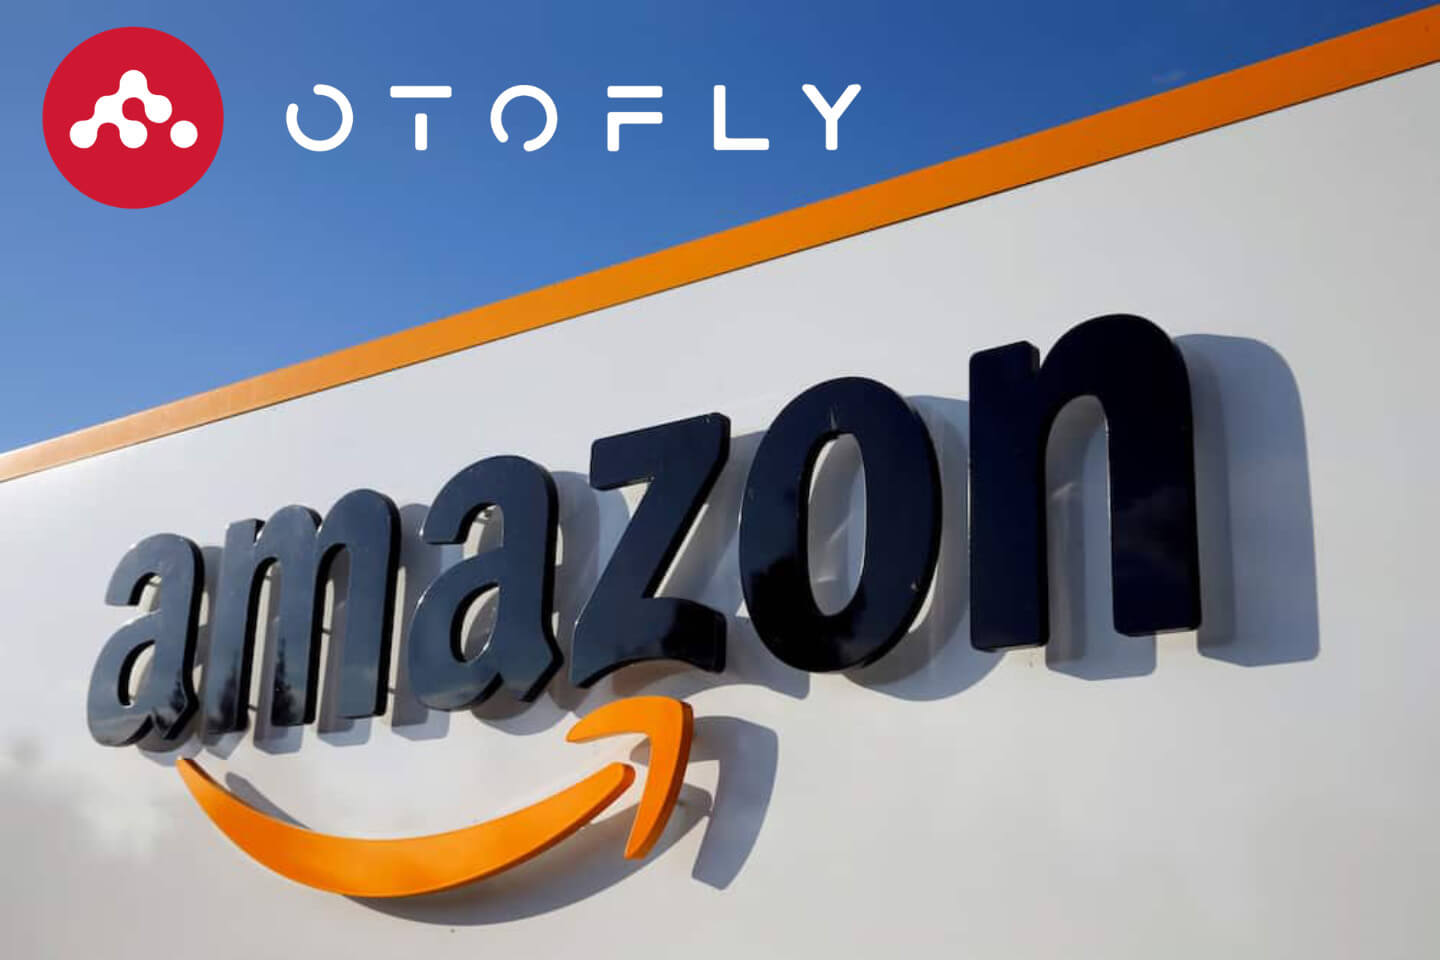 How to Find the OTOFLY Amazon Order Number?